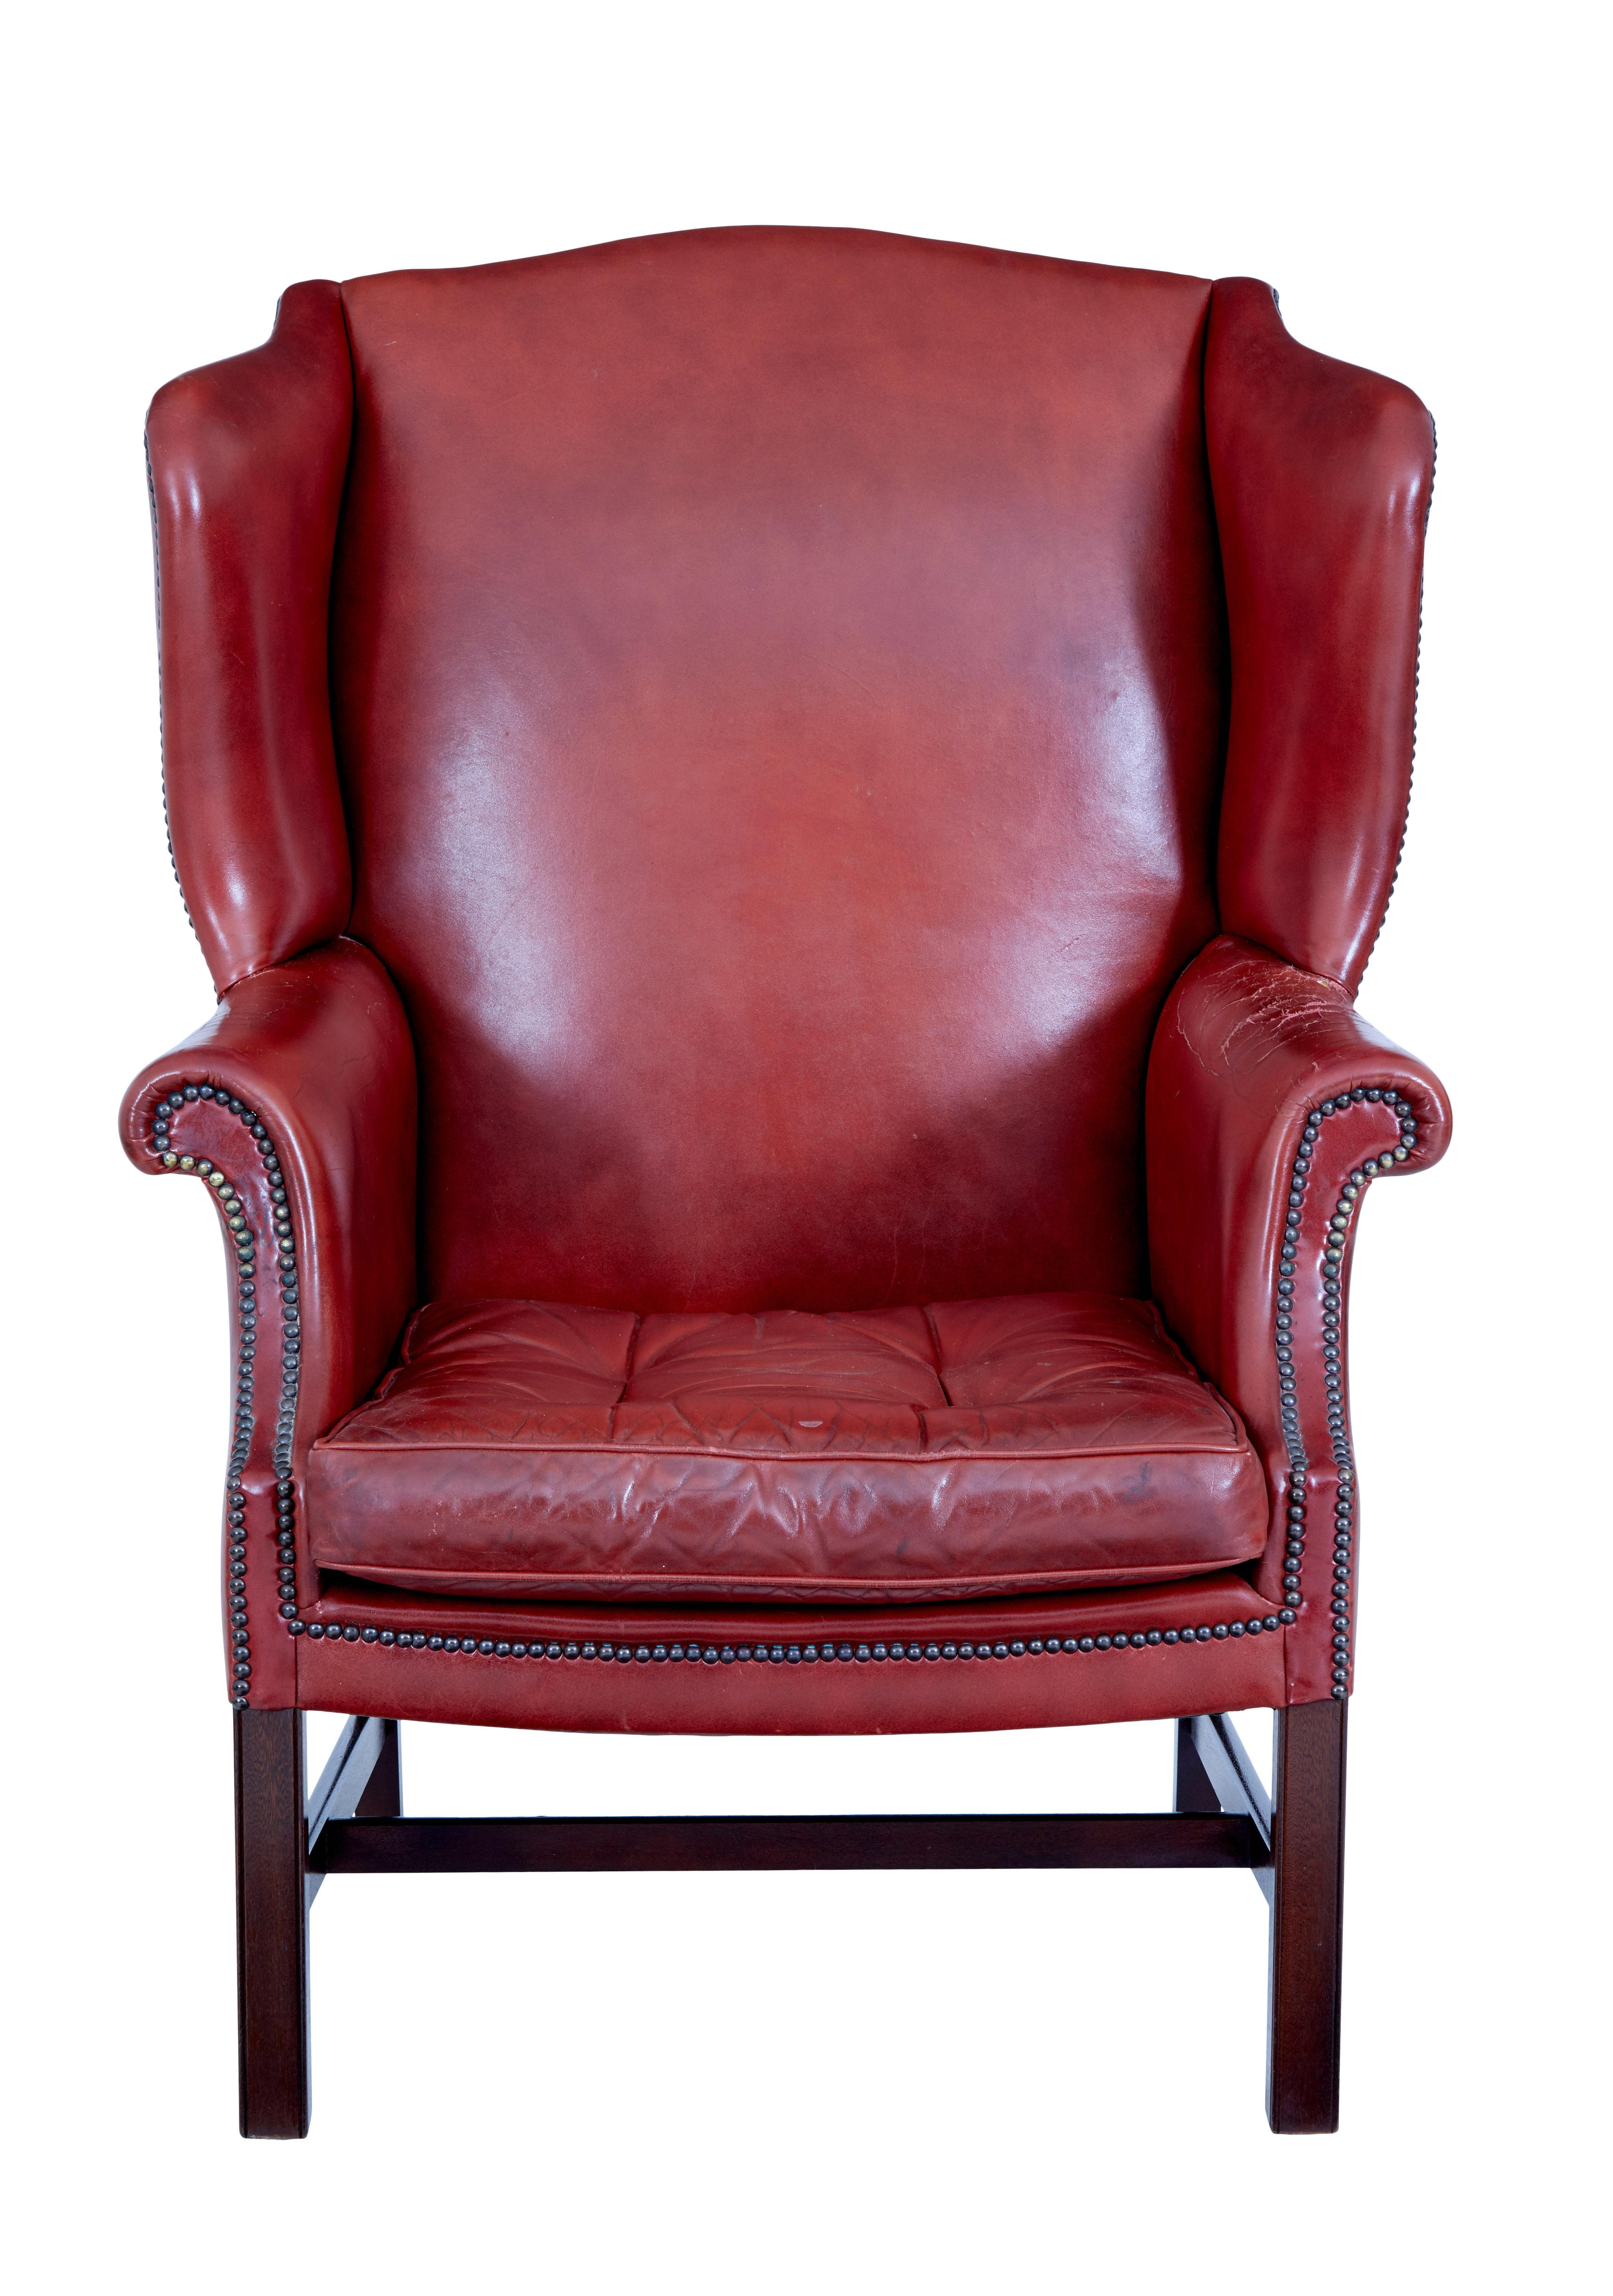 Mid 20th century leather wingback armchair circa 1950.

Great proportions on this leather wingback chair.  Deep red colour with studwork to the arm, removable seat cushion with buttons and piping.

Standing on a mahogany frame.

Obvious wear to 1